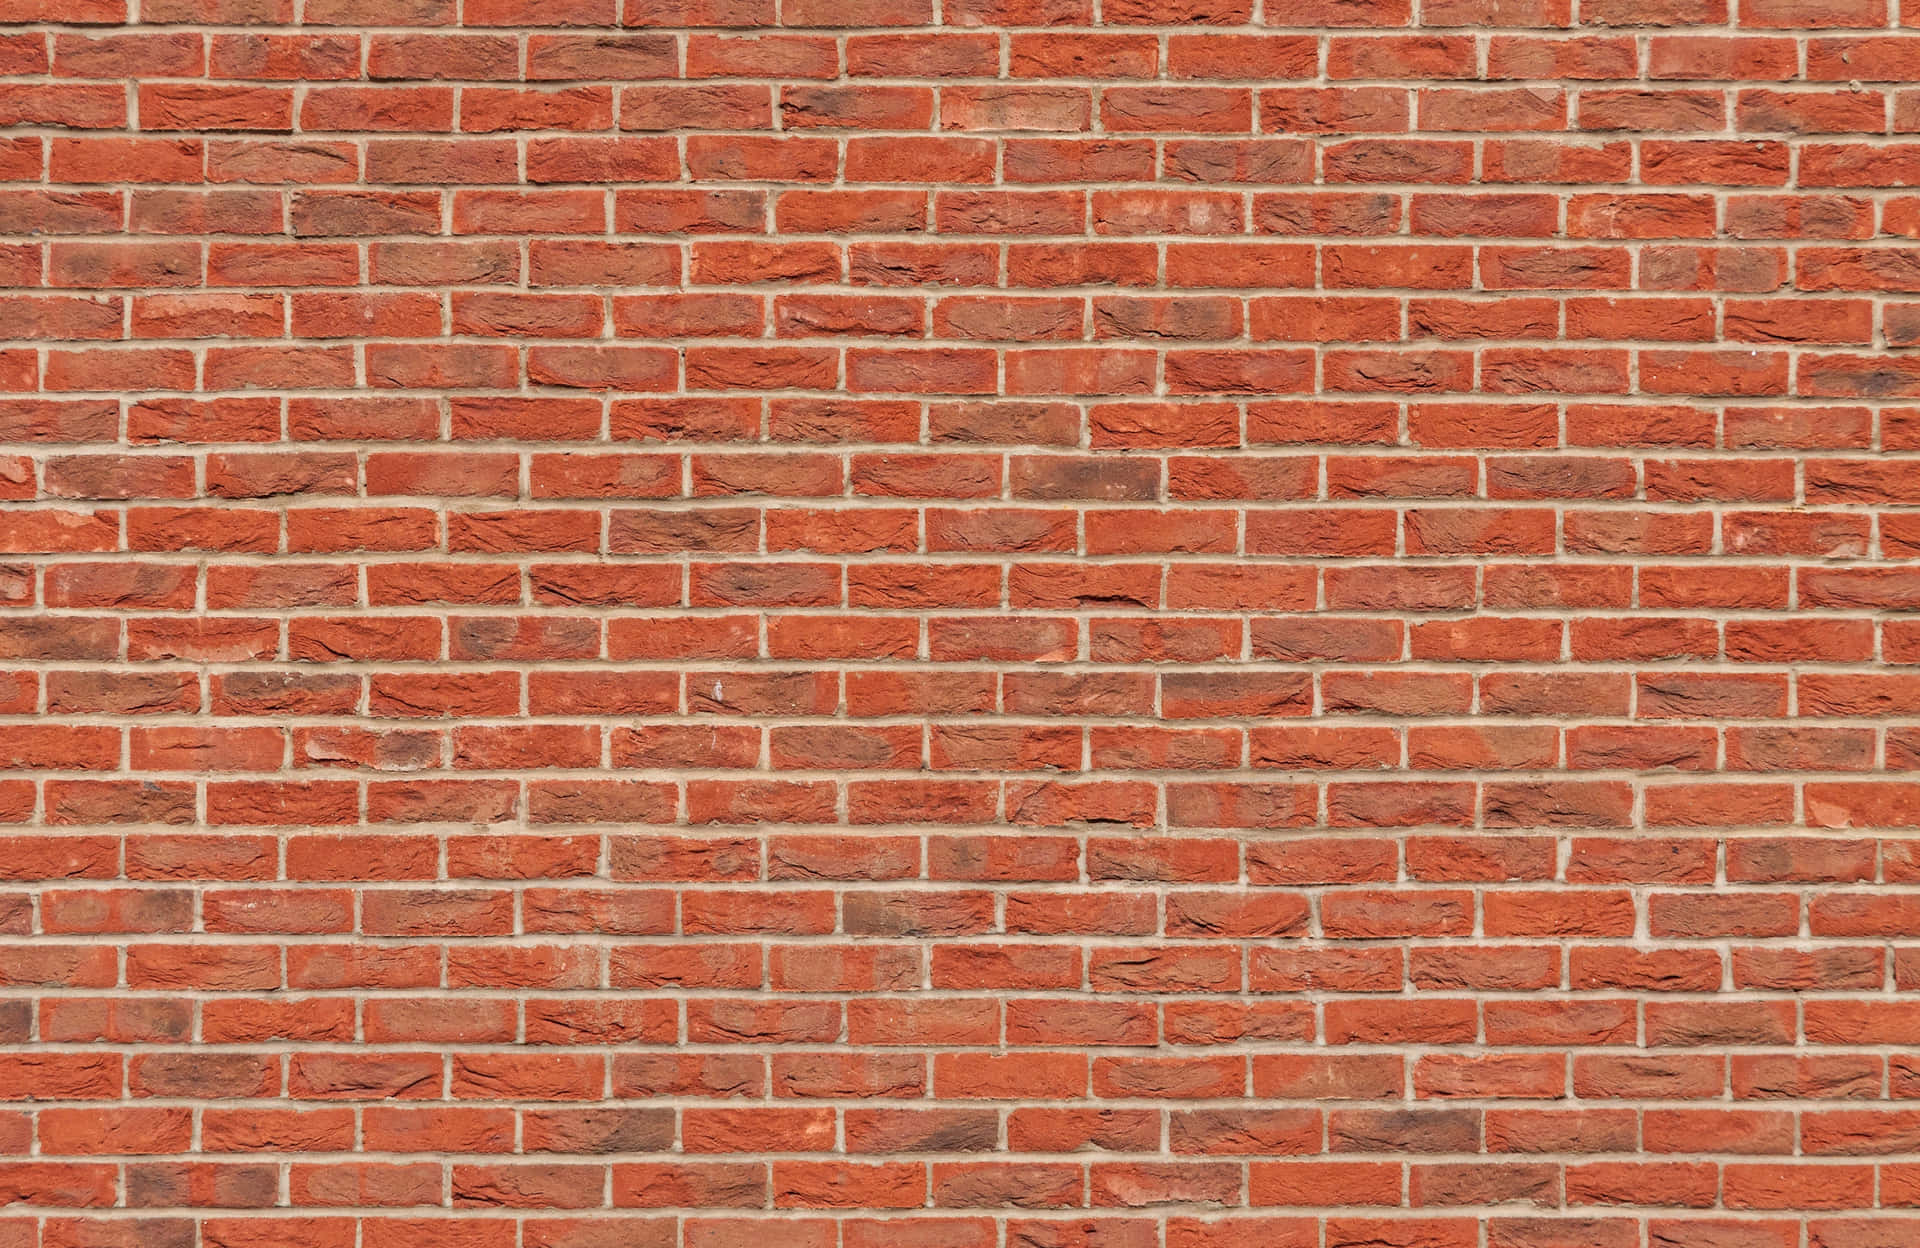 Stand Out with a Brick Background